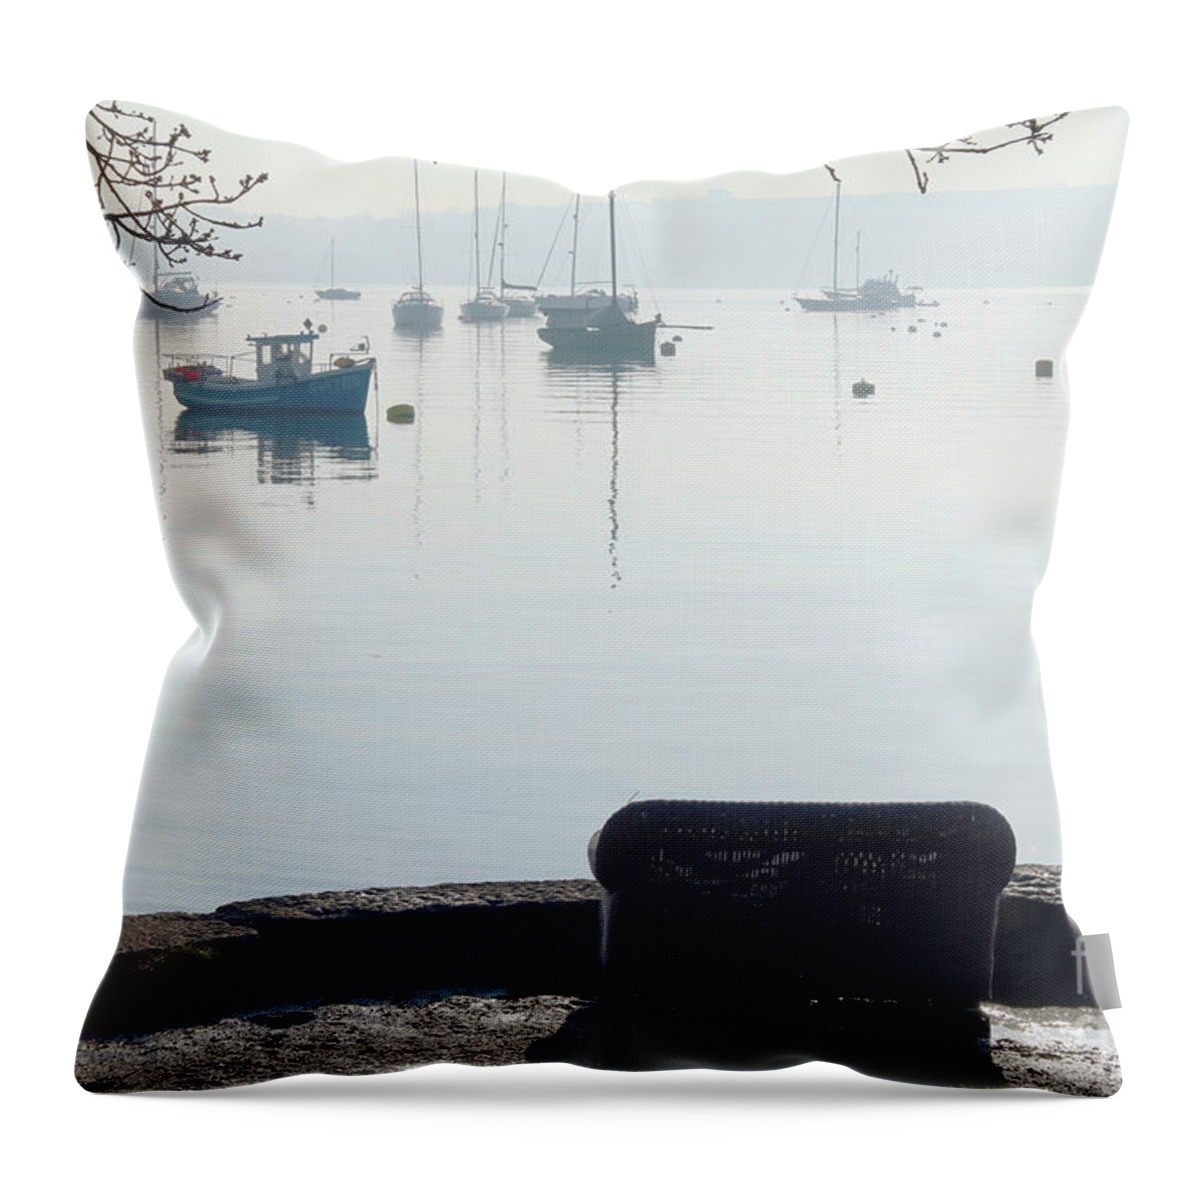 Greatwood Quay Throw Pillow featuring the photograph Greatwood Quay Mylor by Terri Waters